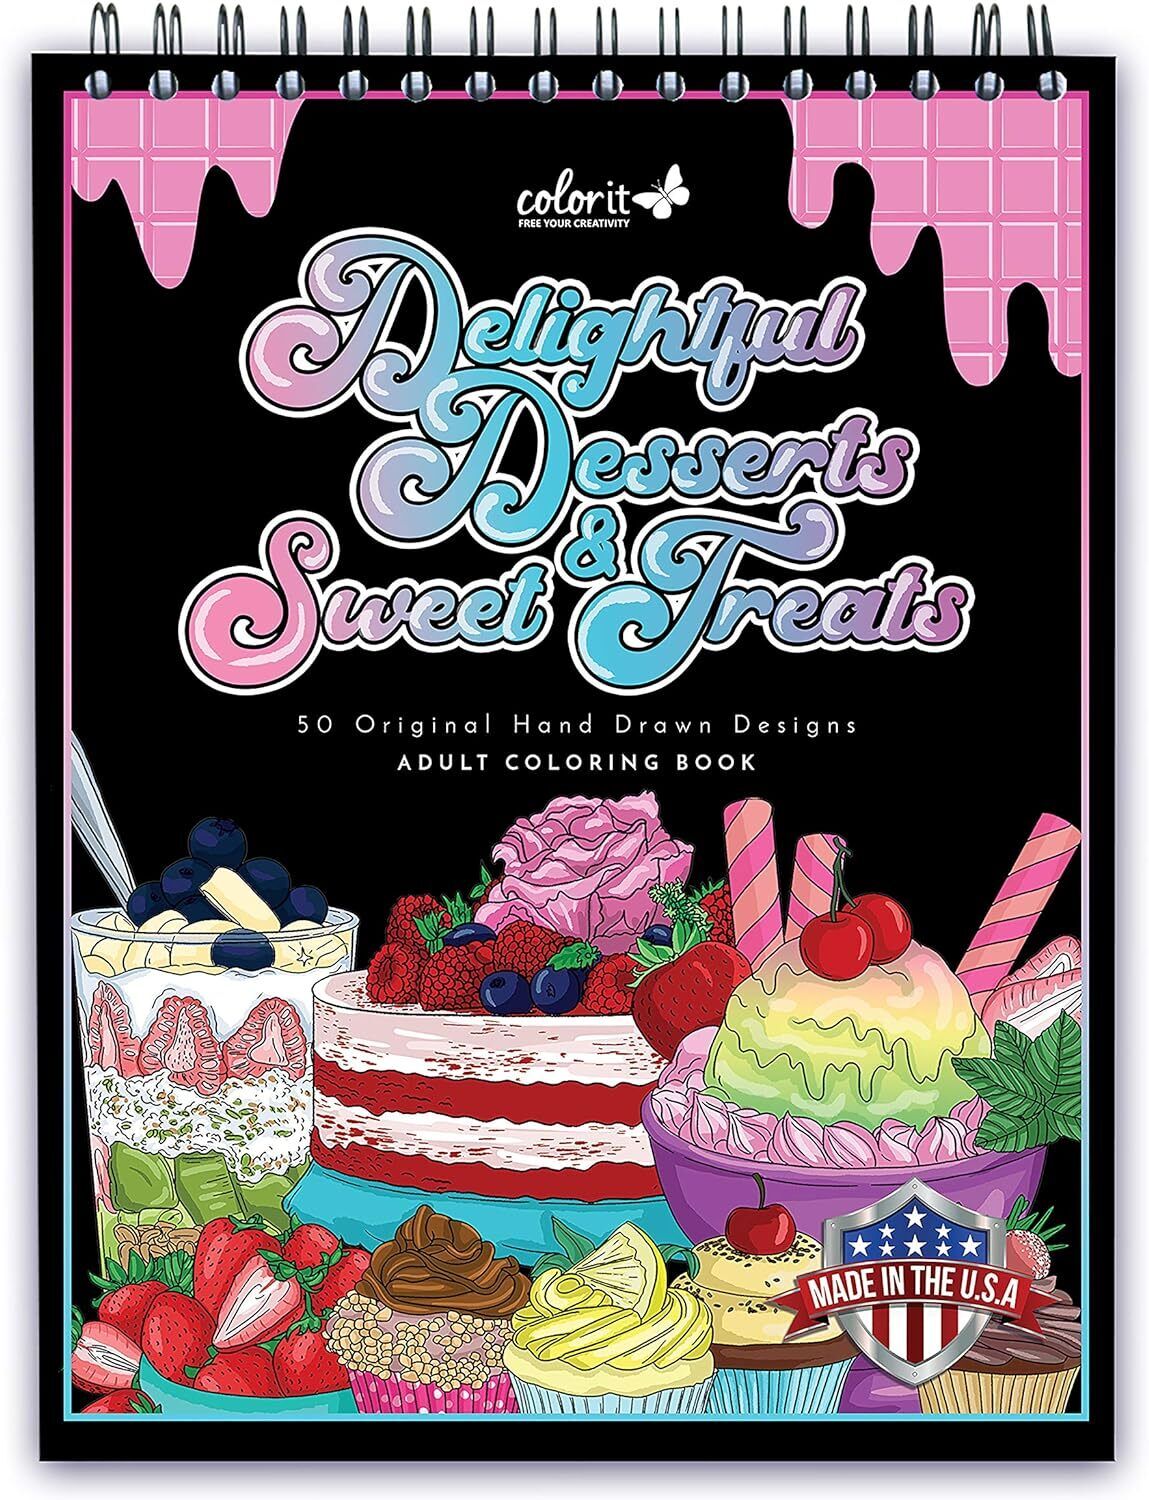 ColorIt Delightful Desserts & Sweet Treats Adult Coloring Book, 50 Sheet - White